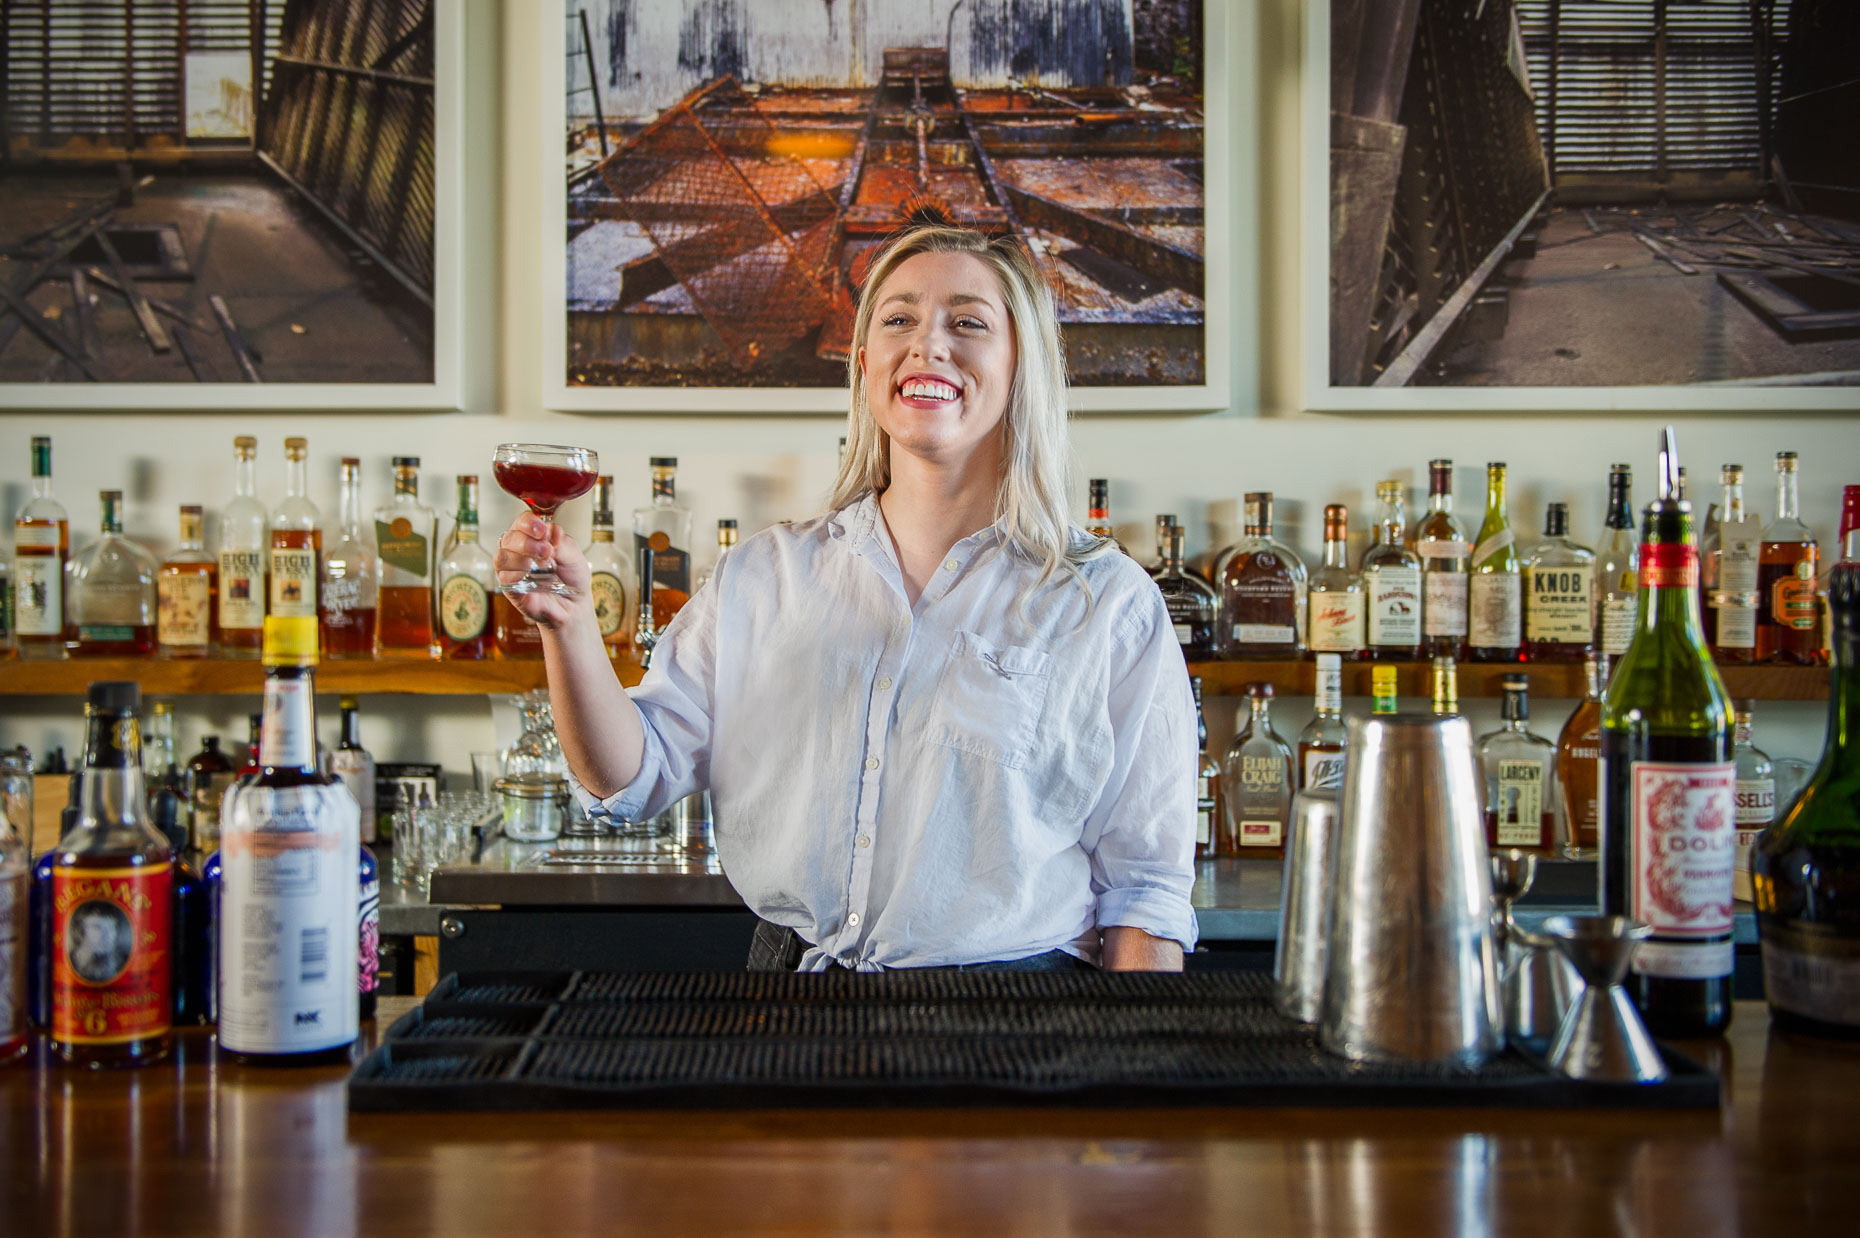 aaron-ingrao-Rye-louisville-keepers-of-the-craft-cocktails-across-america-151-Edit